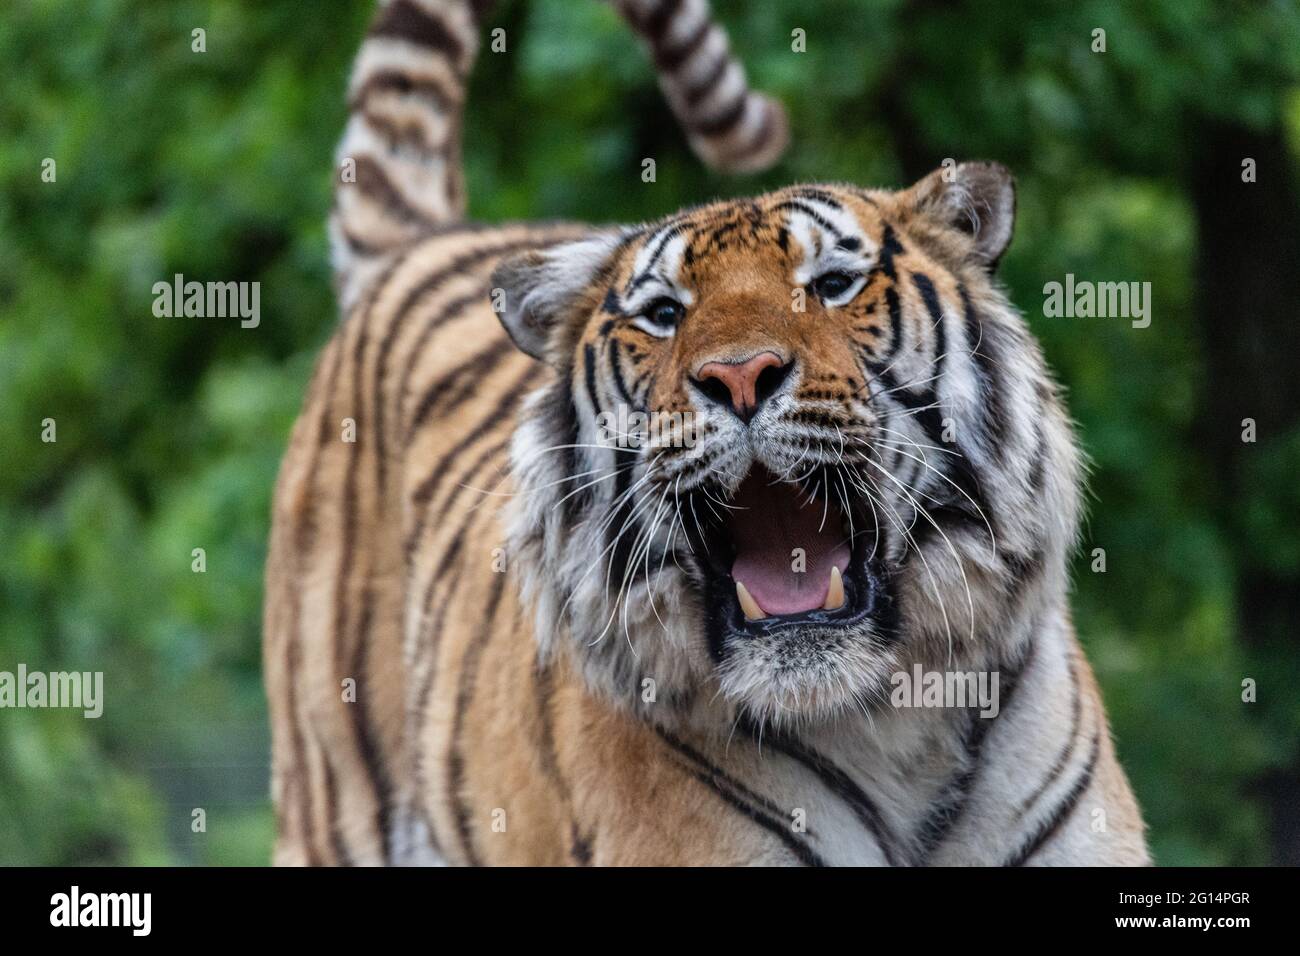 A tiger growls as U.S. Marshals seize 68 protected lions, tigers, lion-tiger hybrids, and a jaguar from Jeffrey and Lauren Lowe Tiger King Park May 17, 2021 in Thackerville, Oklahoma. The park, formerly owned by the Tiger King, Joe Exotic, was seized for violating  the Endangered Species Act. Stock Photo